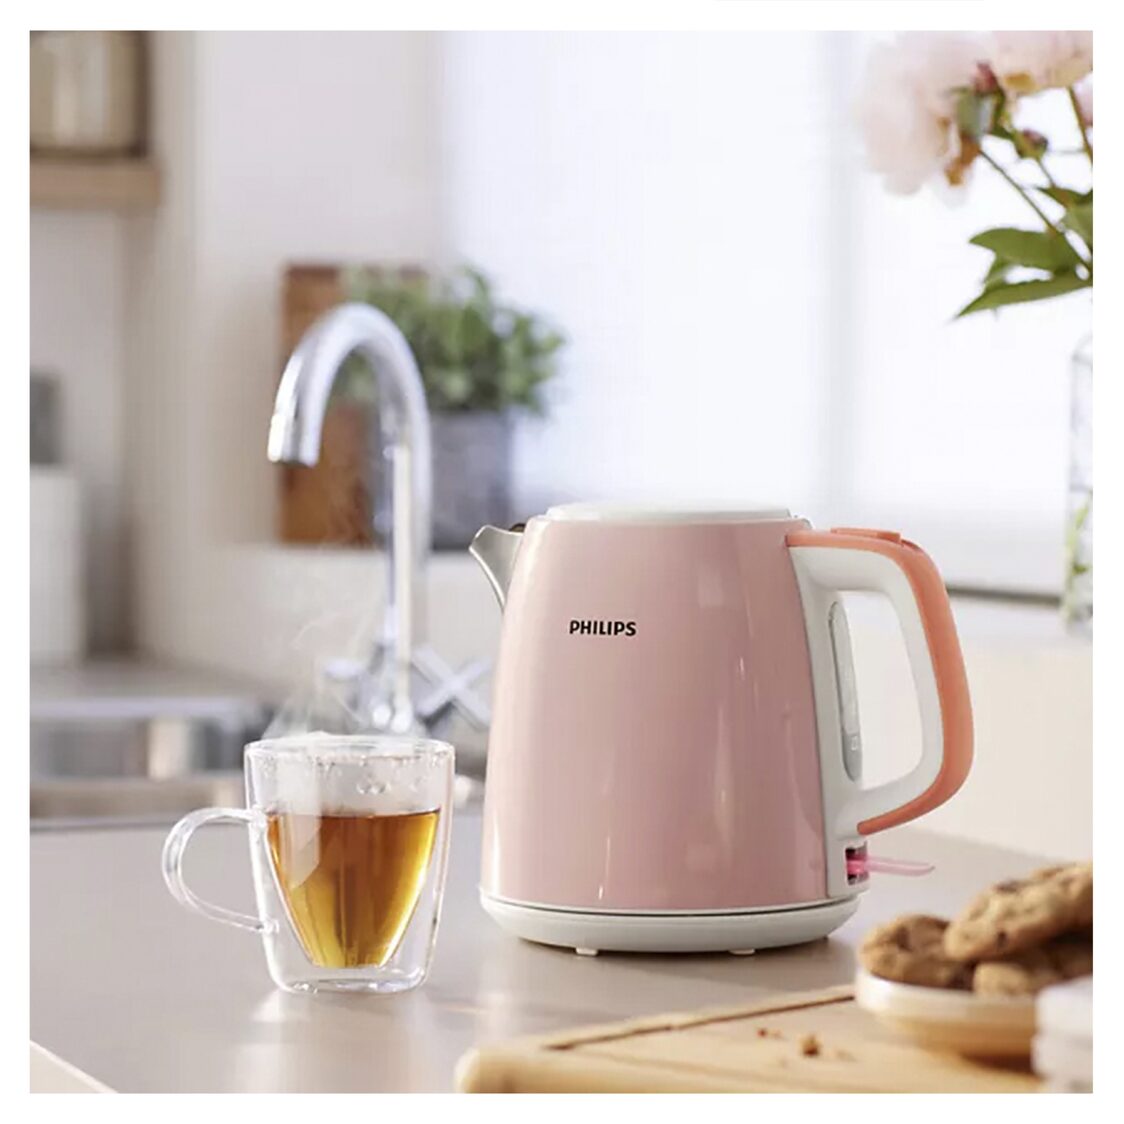 Brentwood Select 1.7L Cordless Electric Tea Kettle at Tractor Supply Co.